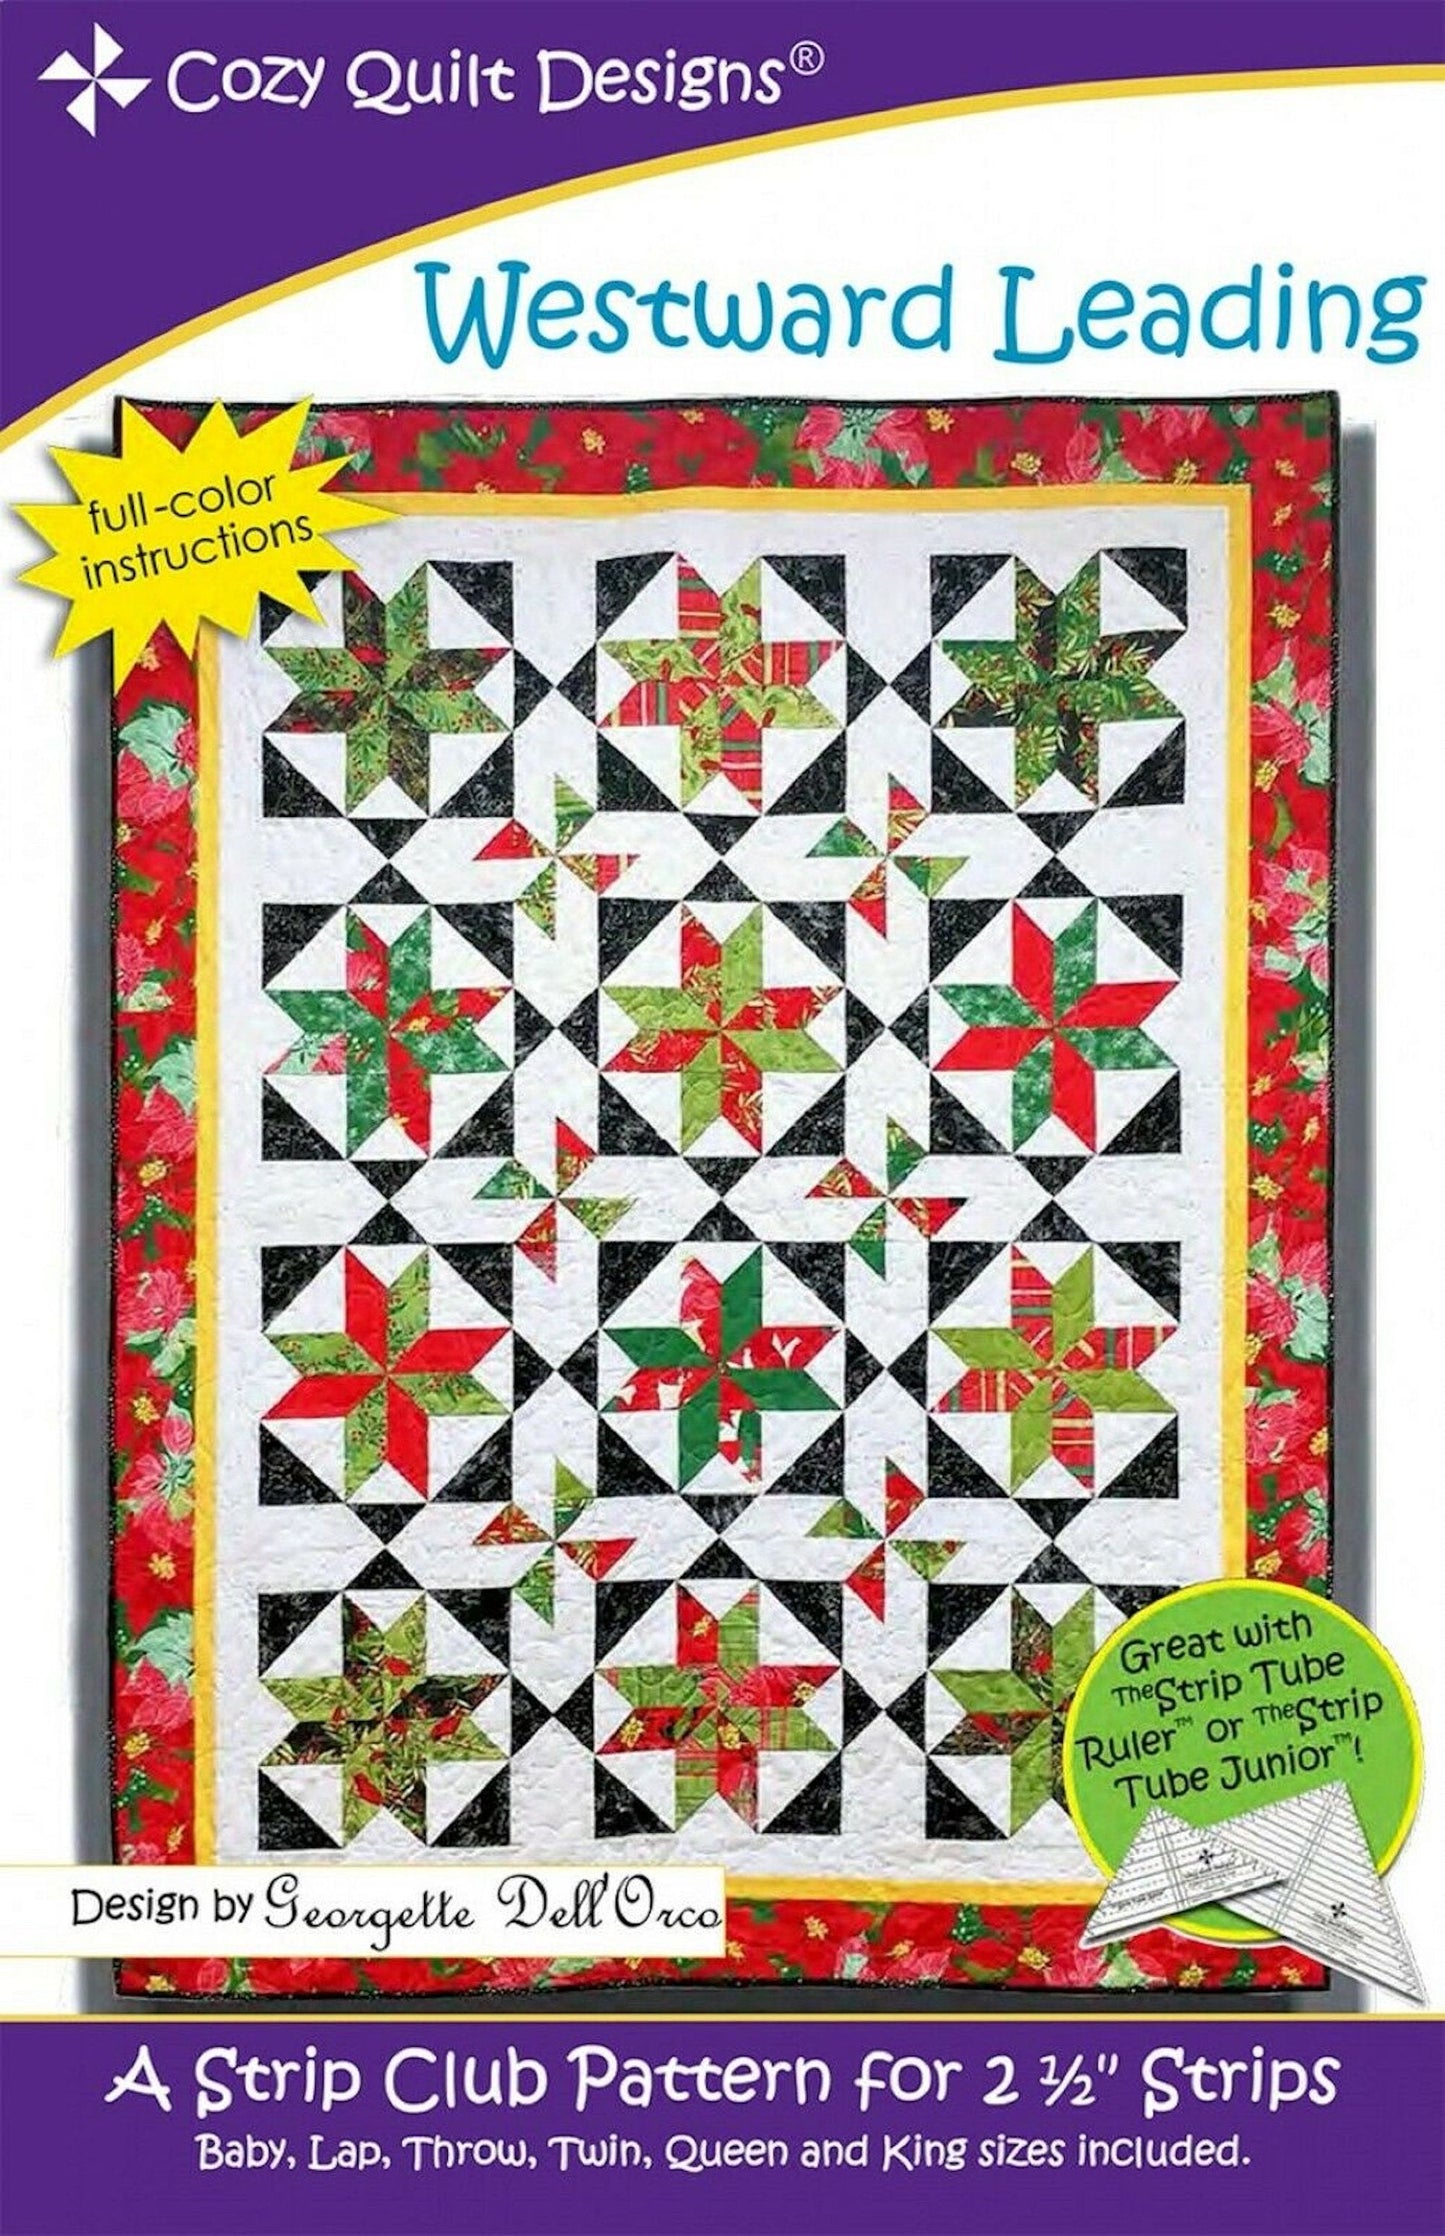 Westward Leading Quilt Pattern by Cozy Quilt Designs